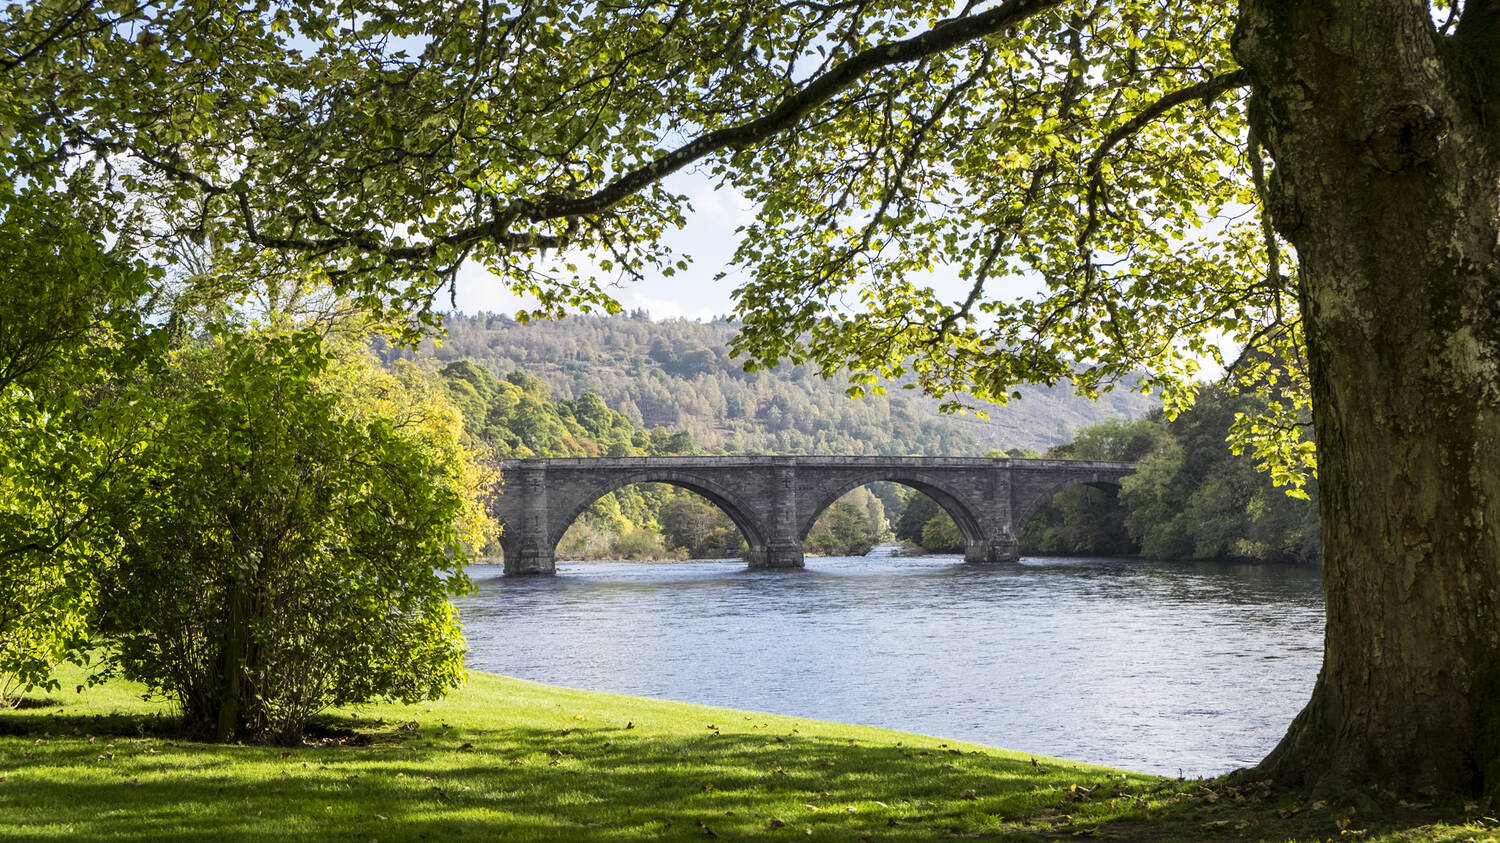 A view of the stone bridge over the River Tay in Dunkeld.